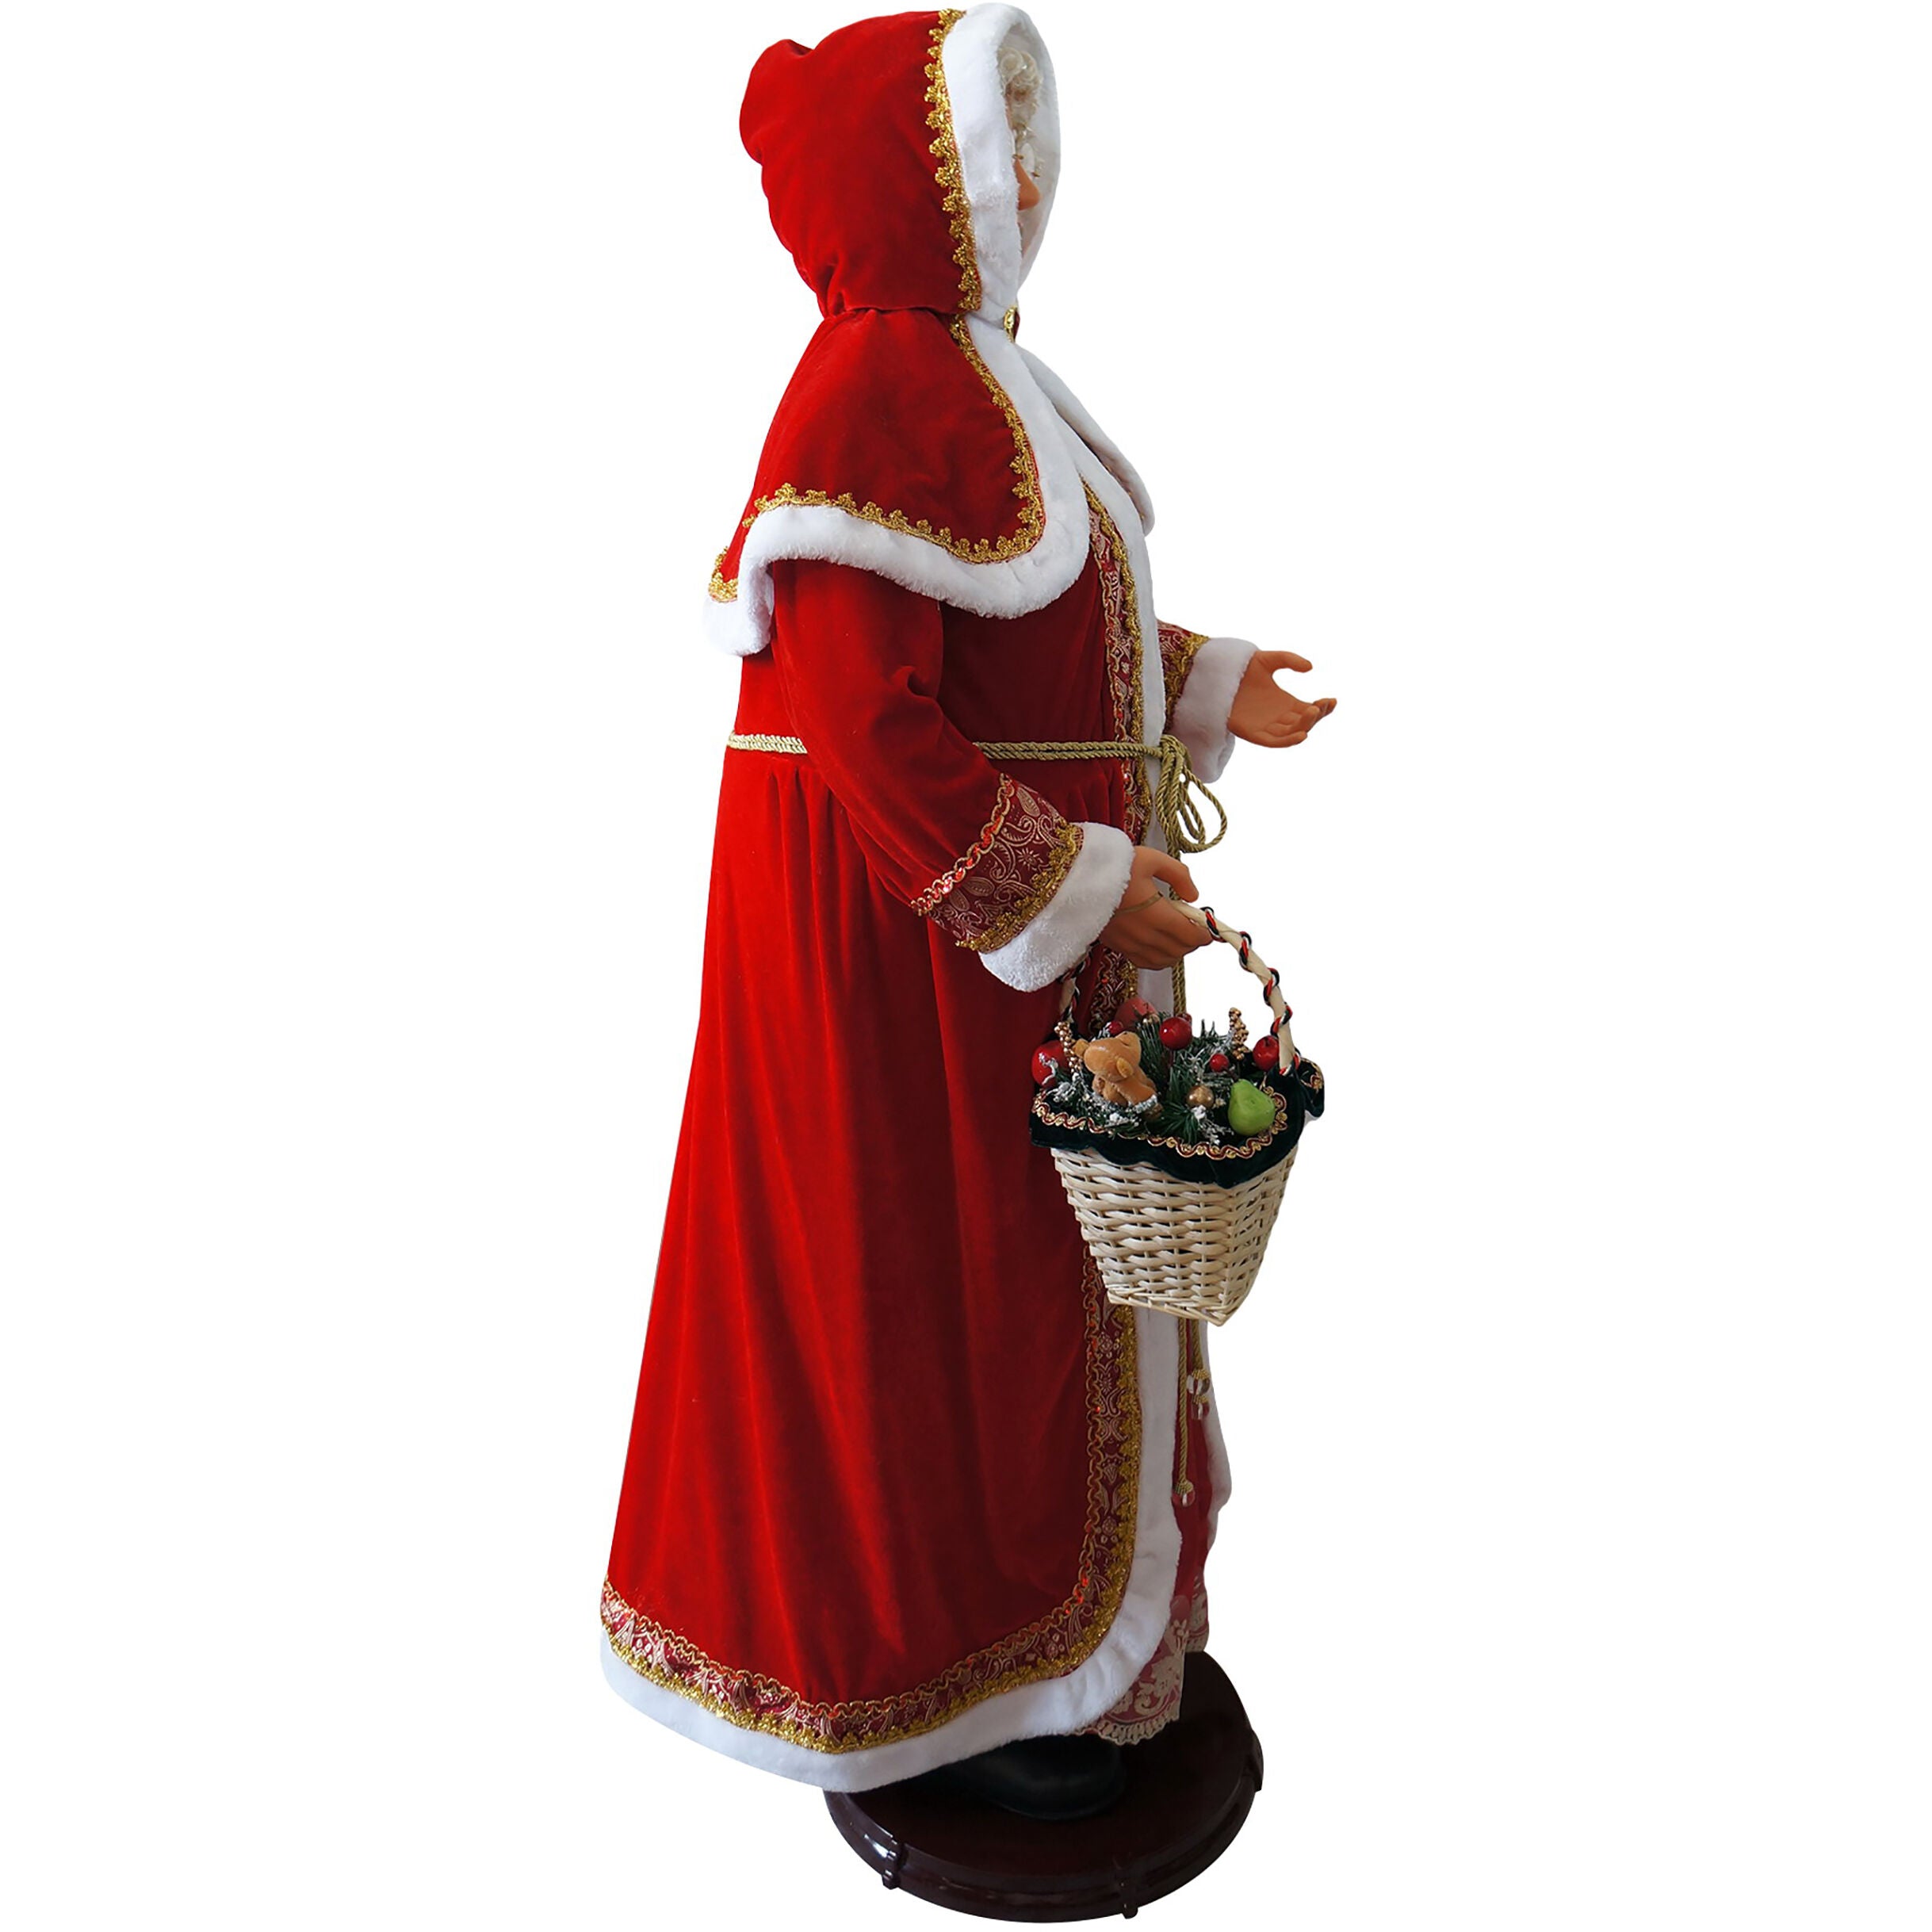 Fraser Hill Farm -  58-In. Dancing Mrs. Claus with Hooded Cloak and Basket, Life-Size Motion-Activated Christmas Animatronic